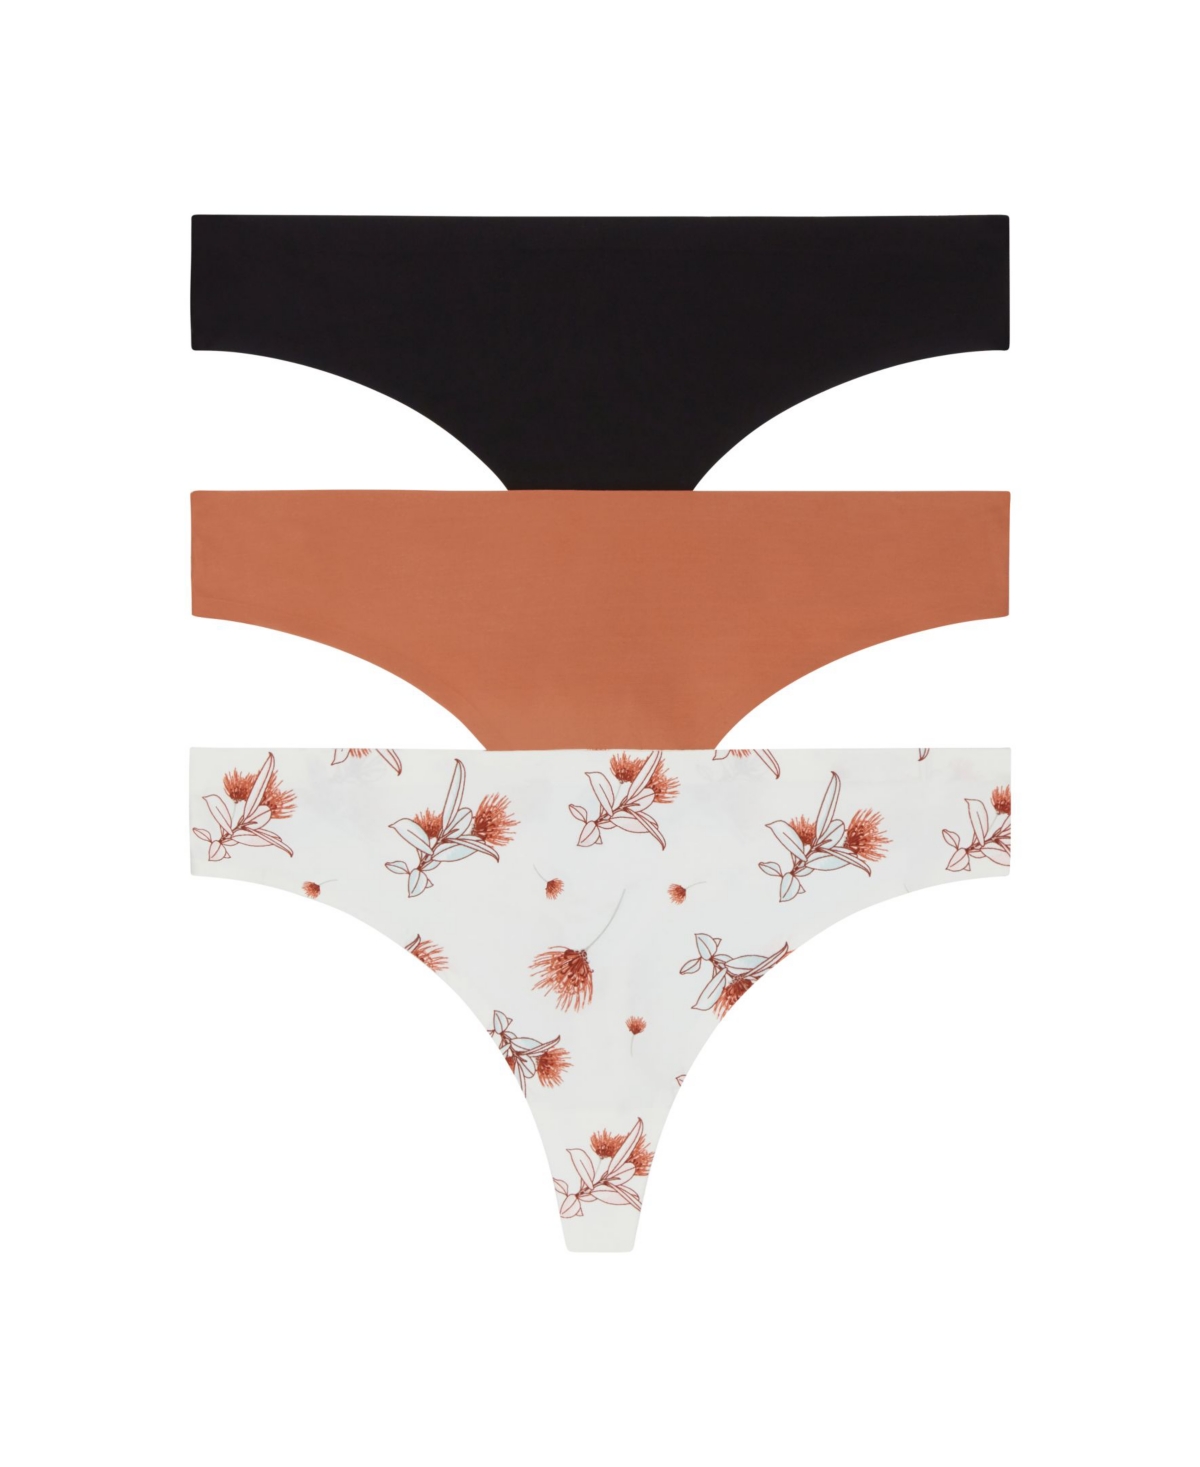 Women's Skinz Thong, Pack of 3 - Black, Sedona, Ivory Floral